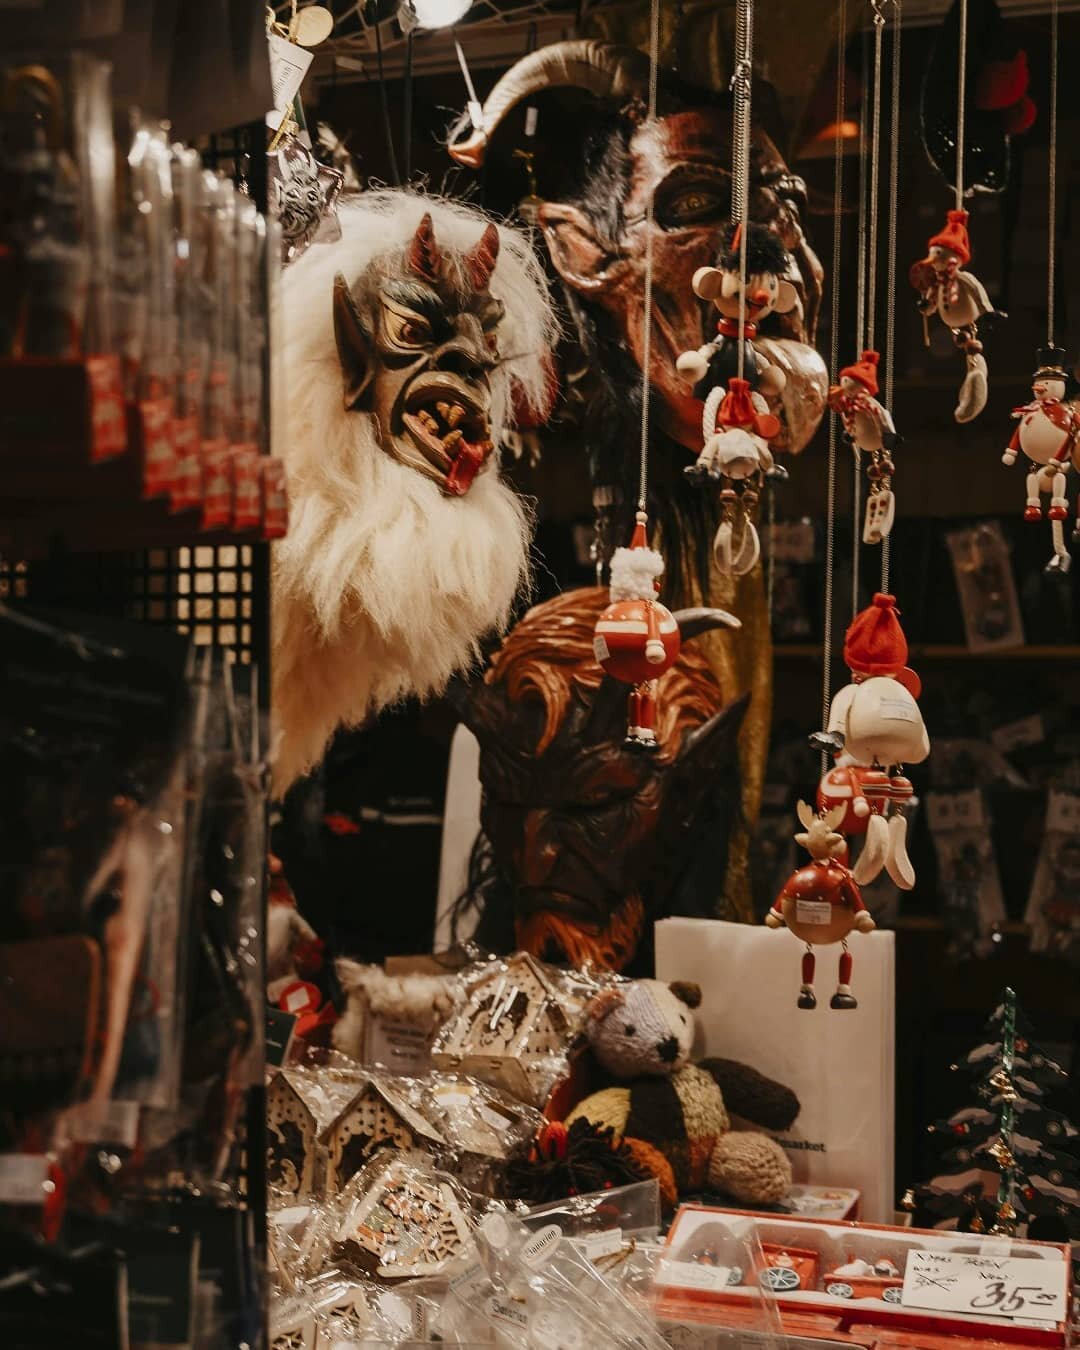 The time of year to scare children into being good @chicago @thechristkindlmarket ..
.
.
.
.
.
#agameoftones #artofvisuals #createcommune #chicagolife #folkgood  #globalcapture  #justgoshoot #livefolk #immigration #chicagophotography #chicagophotogra